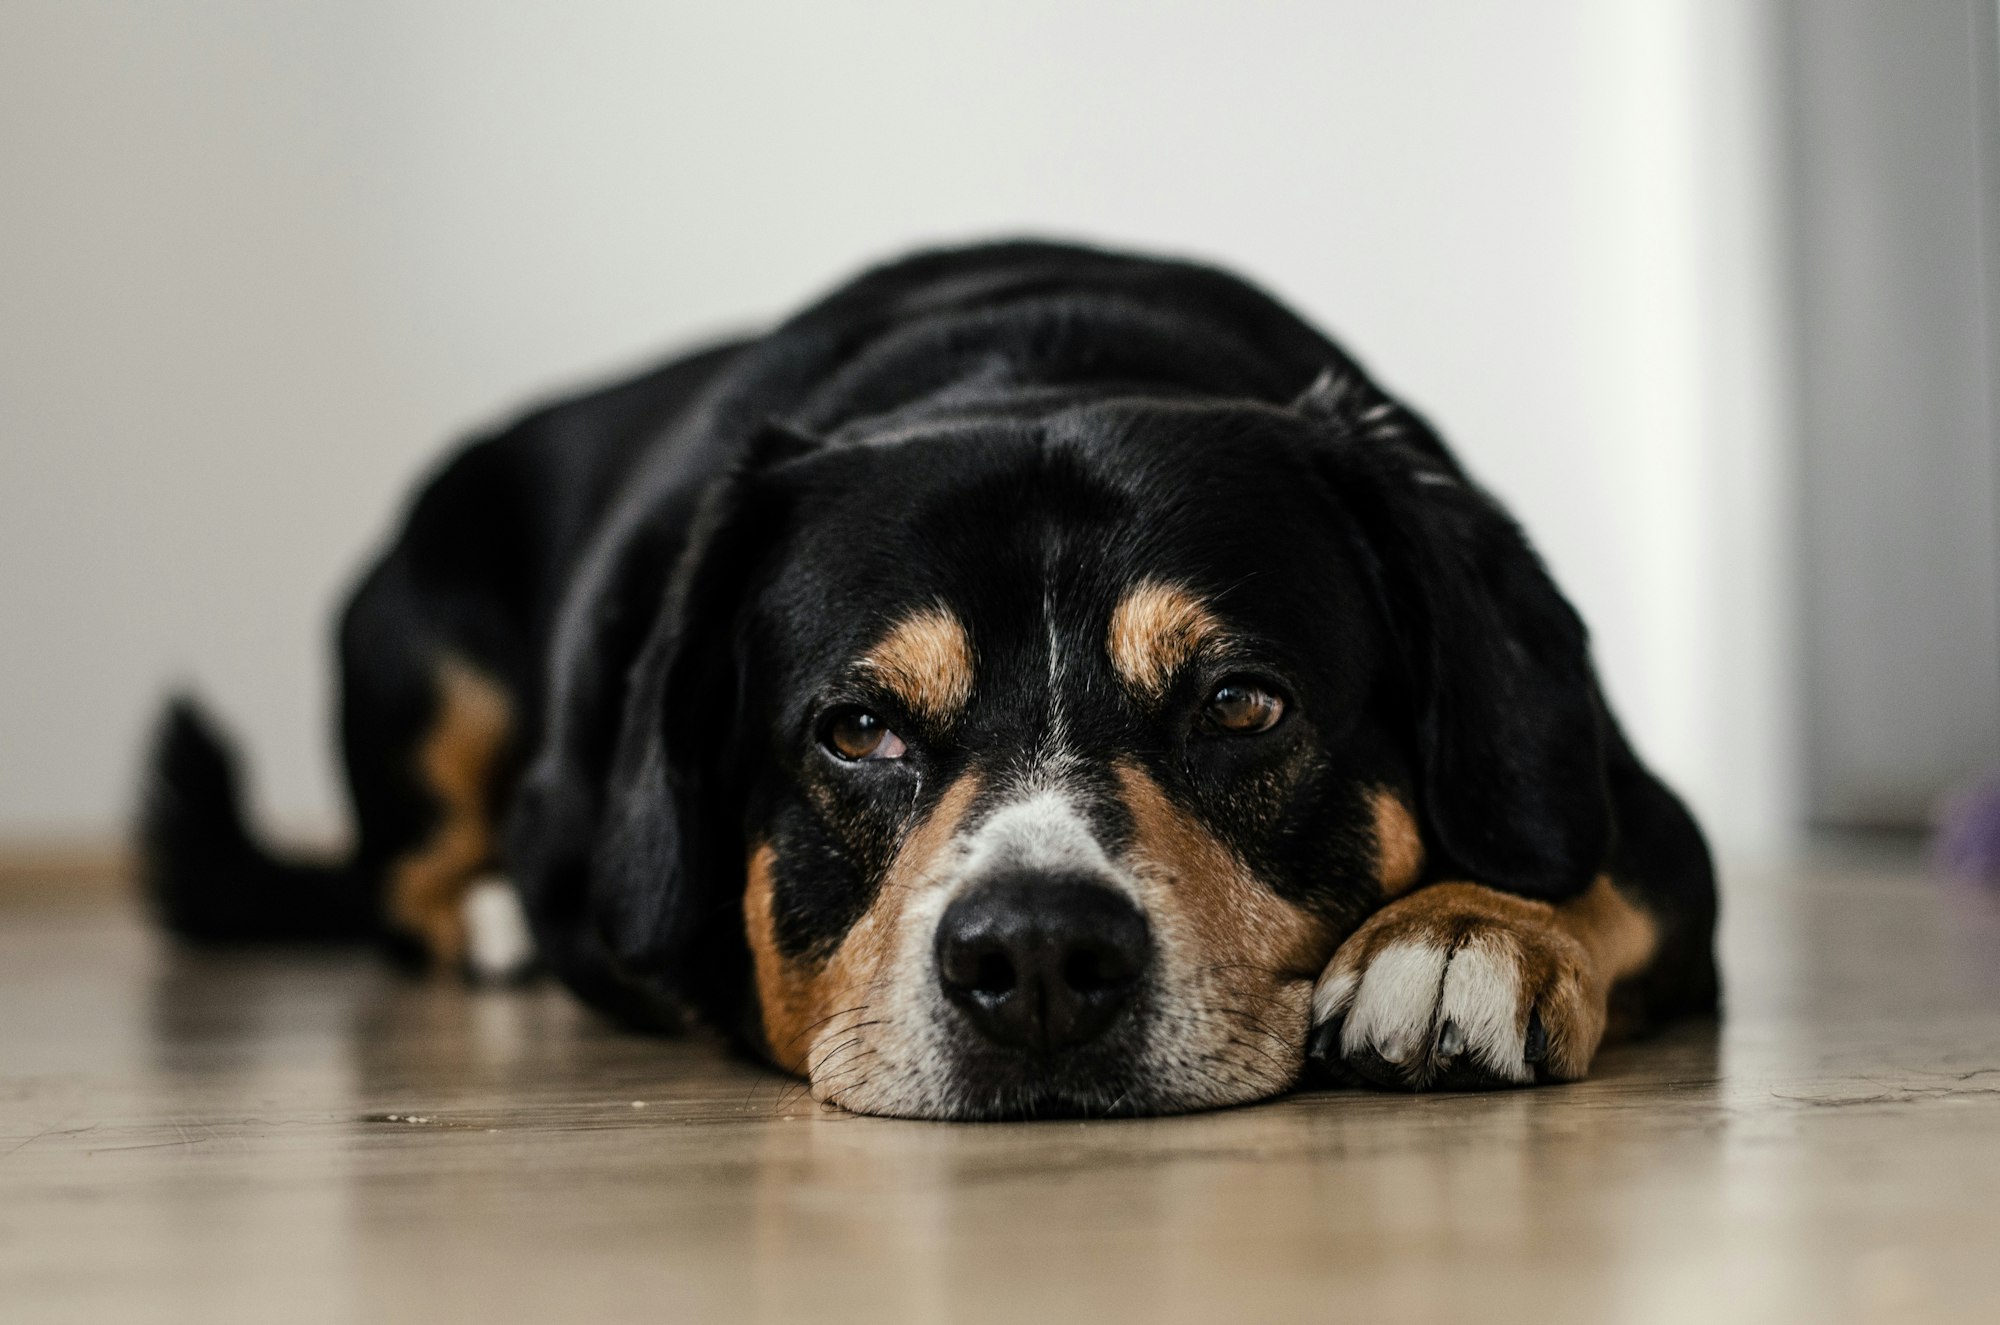 Can Dogs Get Colitis, Vomit, and Diarrhea From Stress?